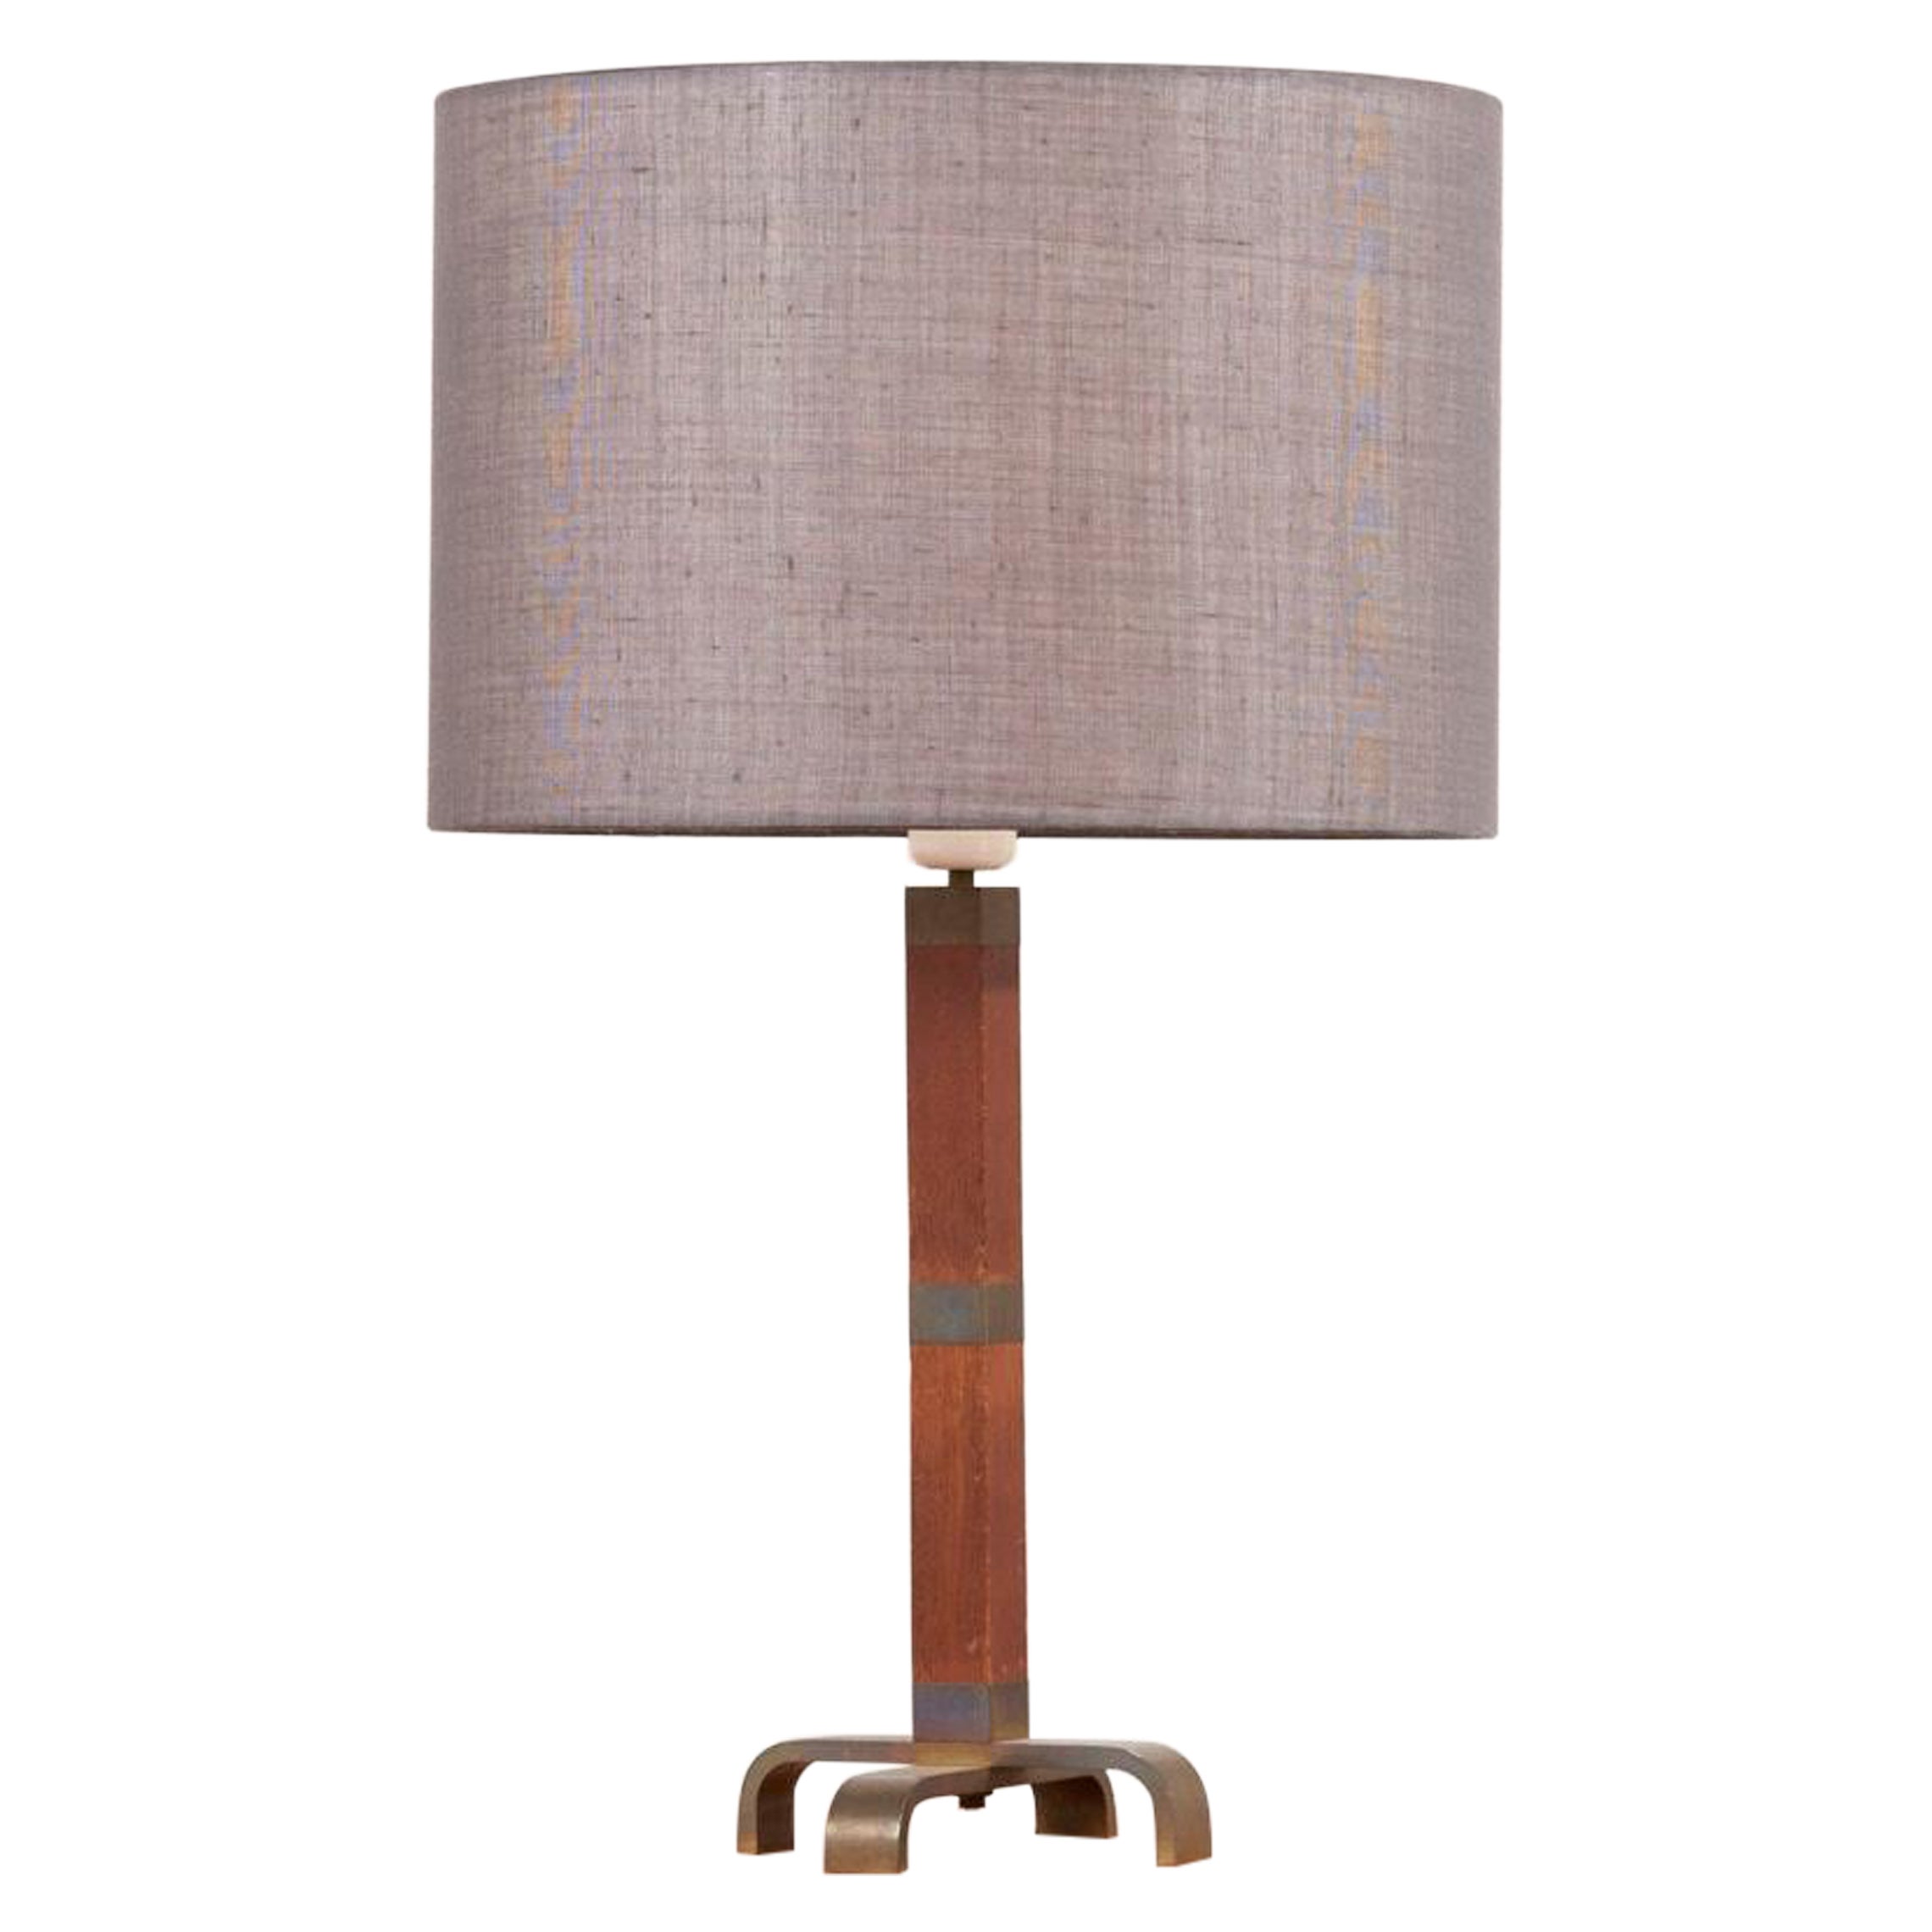 Table Lamp with Wooden Base and Grey Lampshade, 1950s For Sale